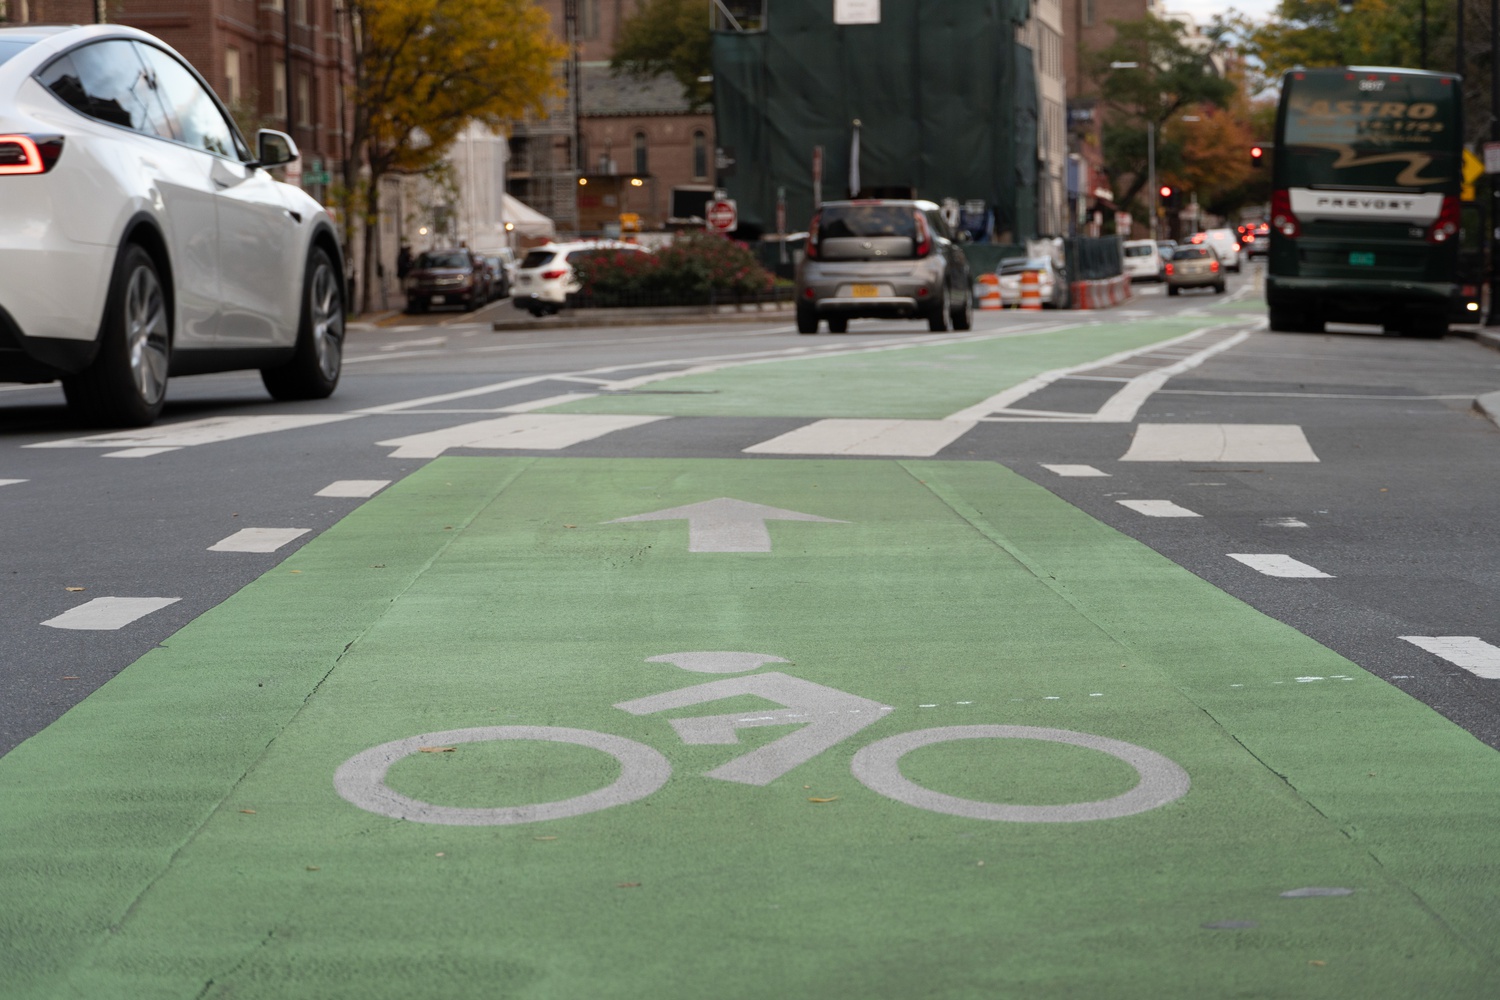 Joan F. Pickett has been involved with the transit advocacy group Cambridge Streets For All, which filed a lawsuit in June 2022 against Cambridge challenging the removal of parking areas for bike lanes.